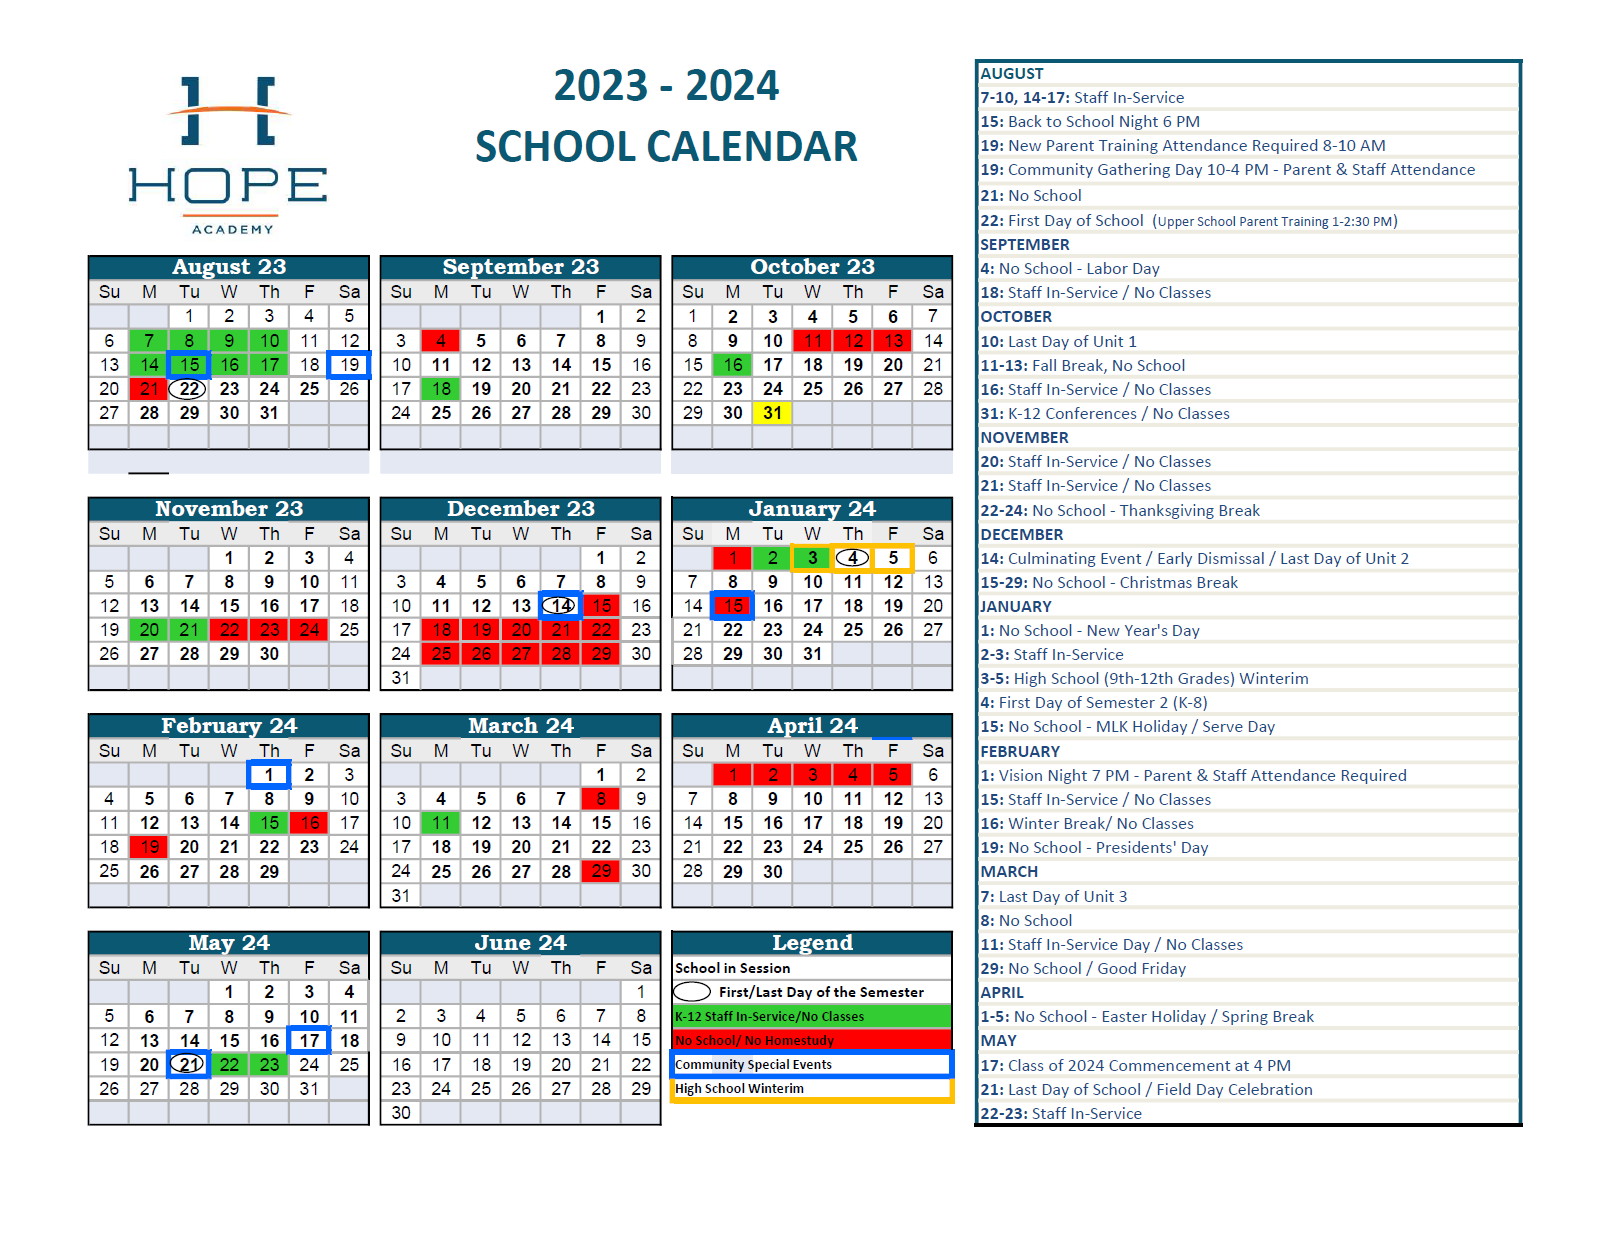 OUR 2022 SCHEDULE IS HERE